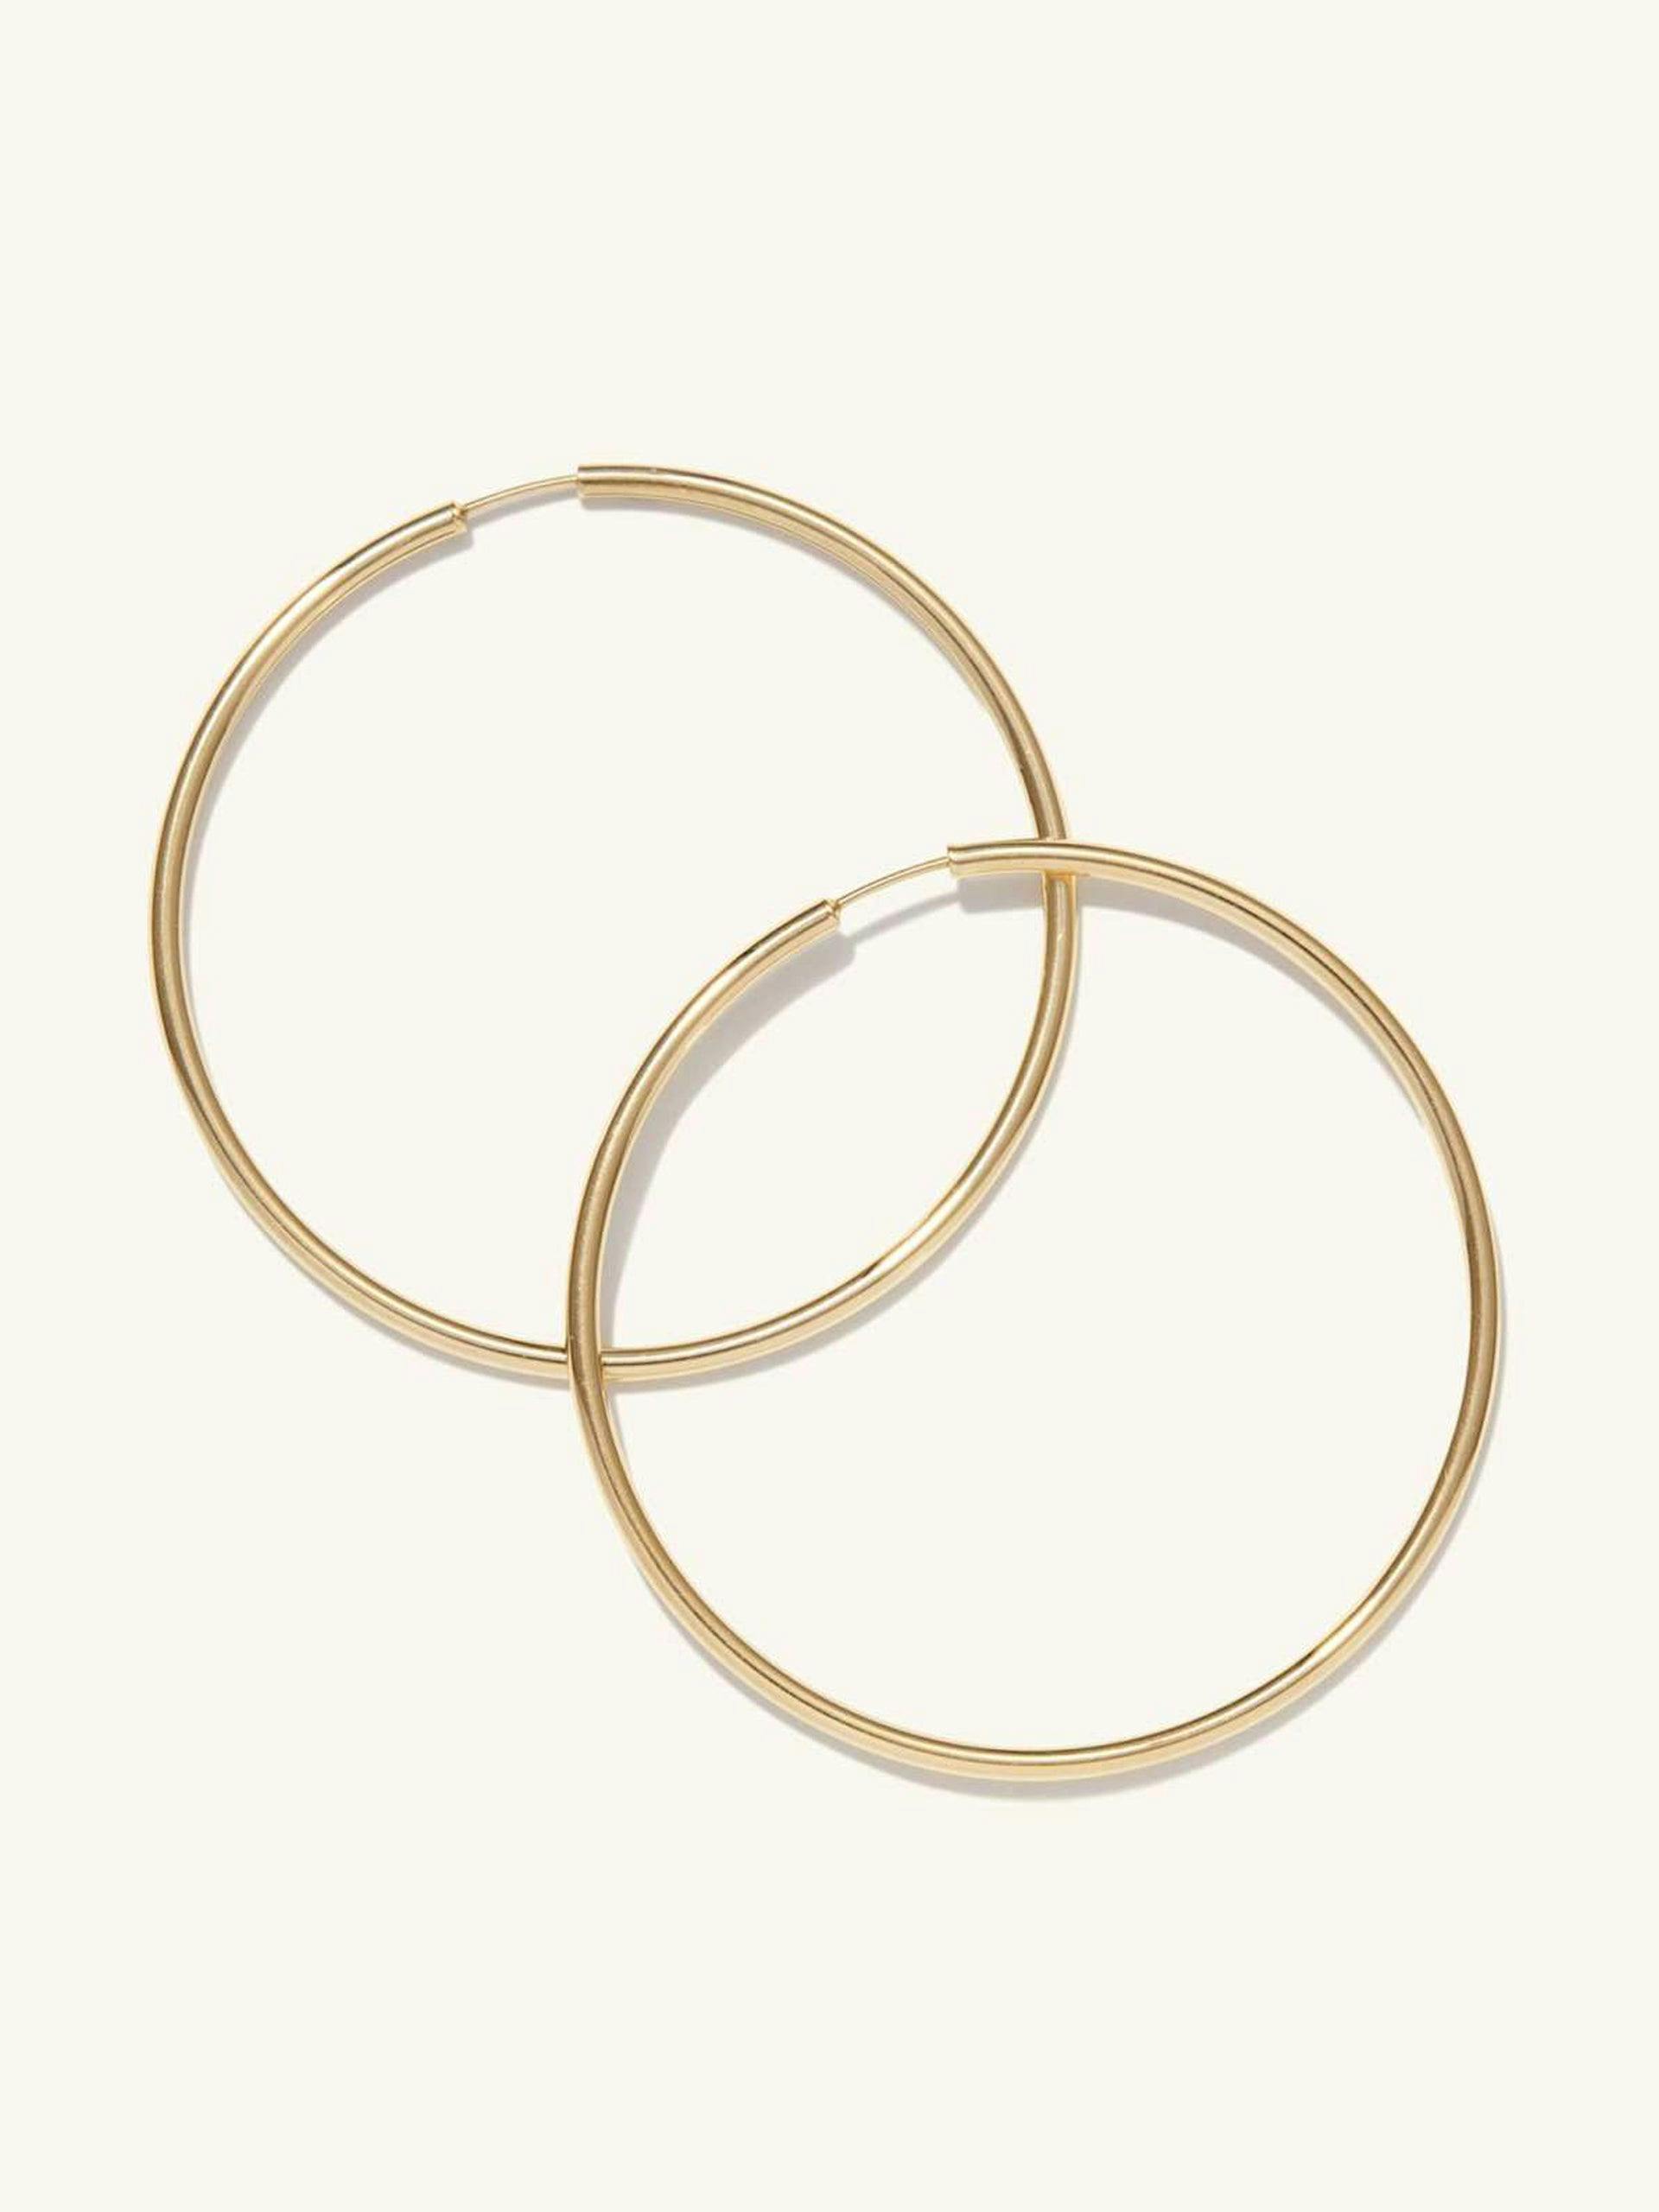 Gold oversized thin hoops